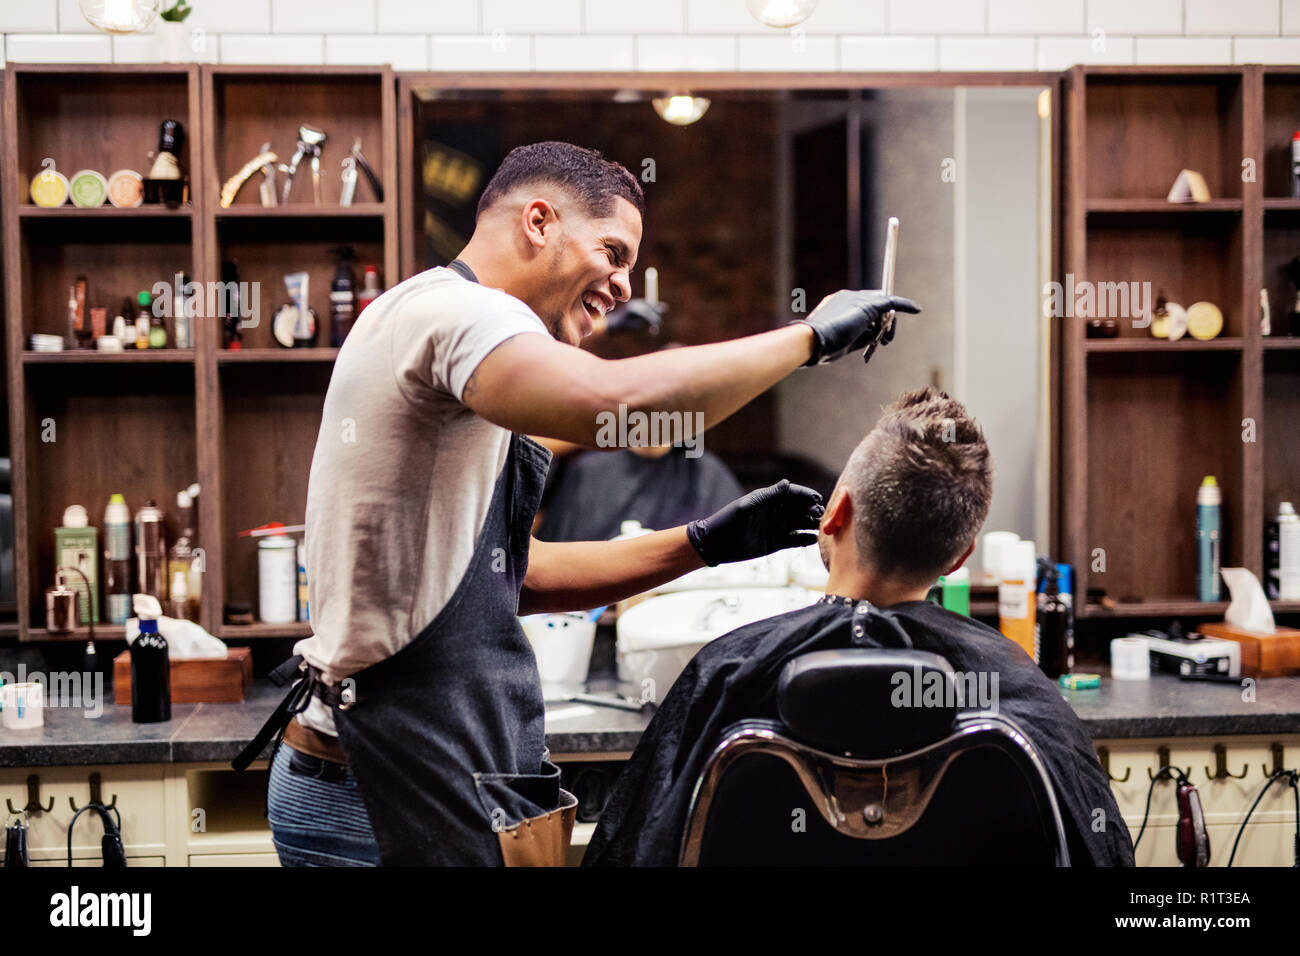 Rear view of man client visiting haidresser and hairstylist in barber shop. Stock Photo